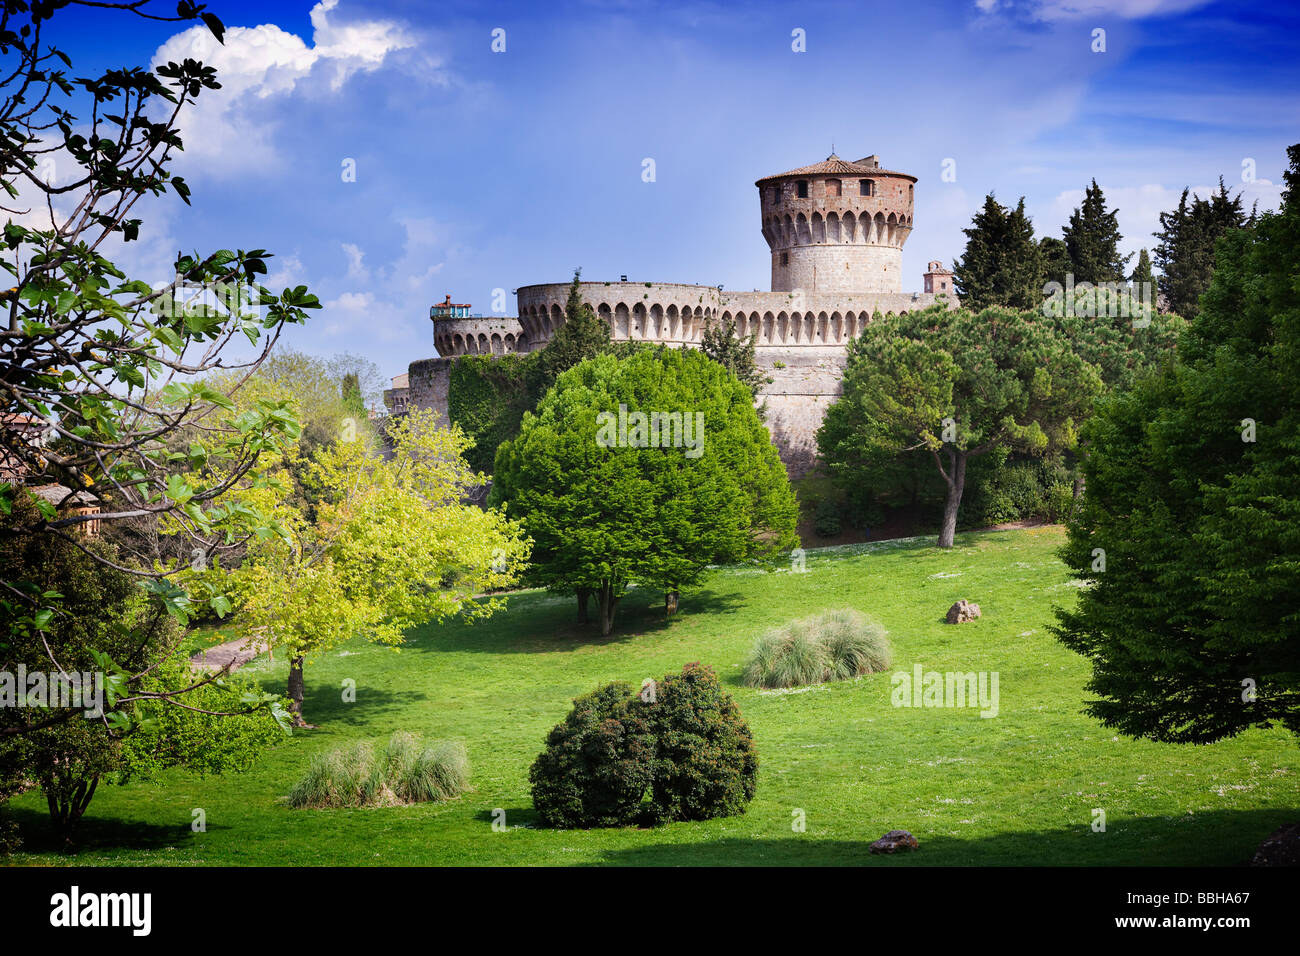 Medieval castle in Tuscany, Italy Stock Photo